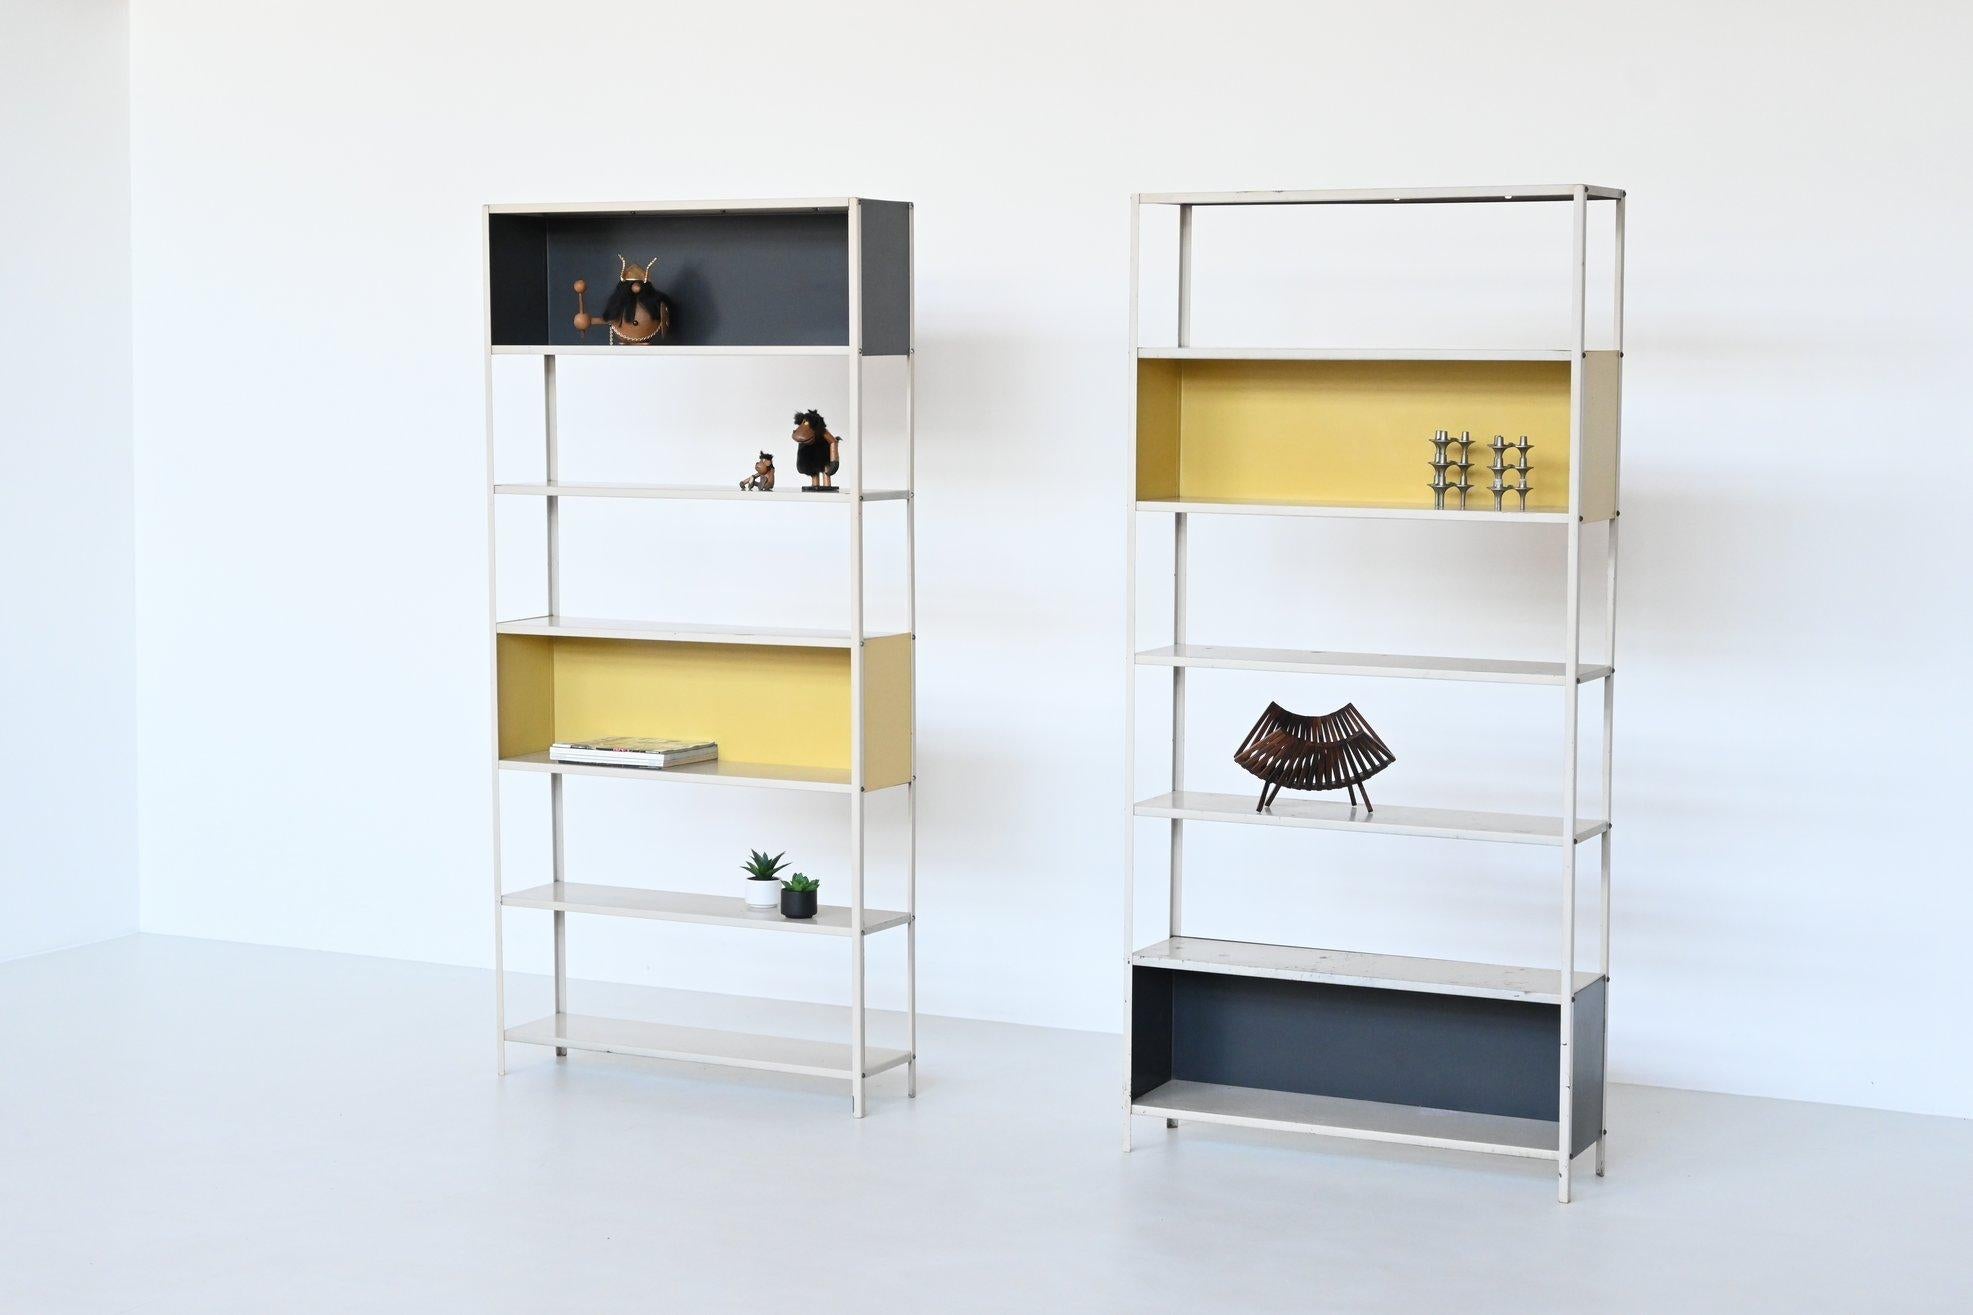 Very nice pair of bookcases or shelving units designed by Friso Kramer for the Bijenkorf and manufactured by Asmeta, The Netherlands 1953. Martin Visser commissioned Friso Kramer to design a simple usable shelving unit for de Bijenkorf. These